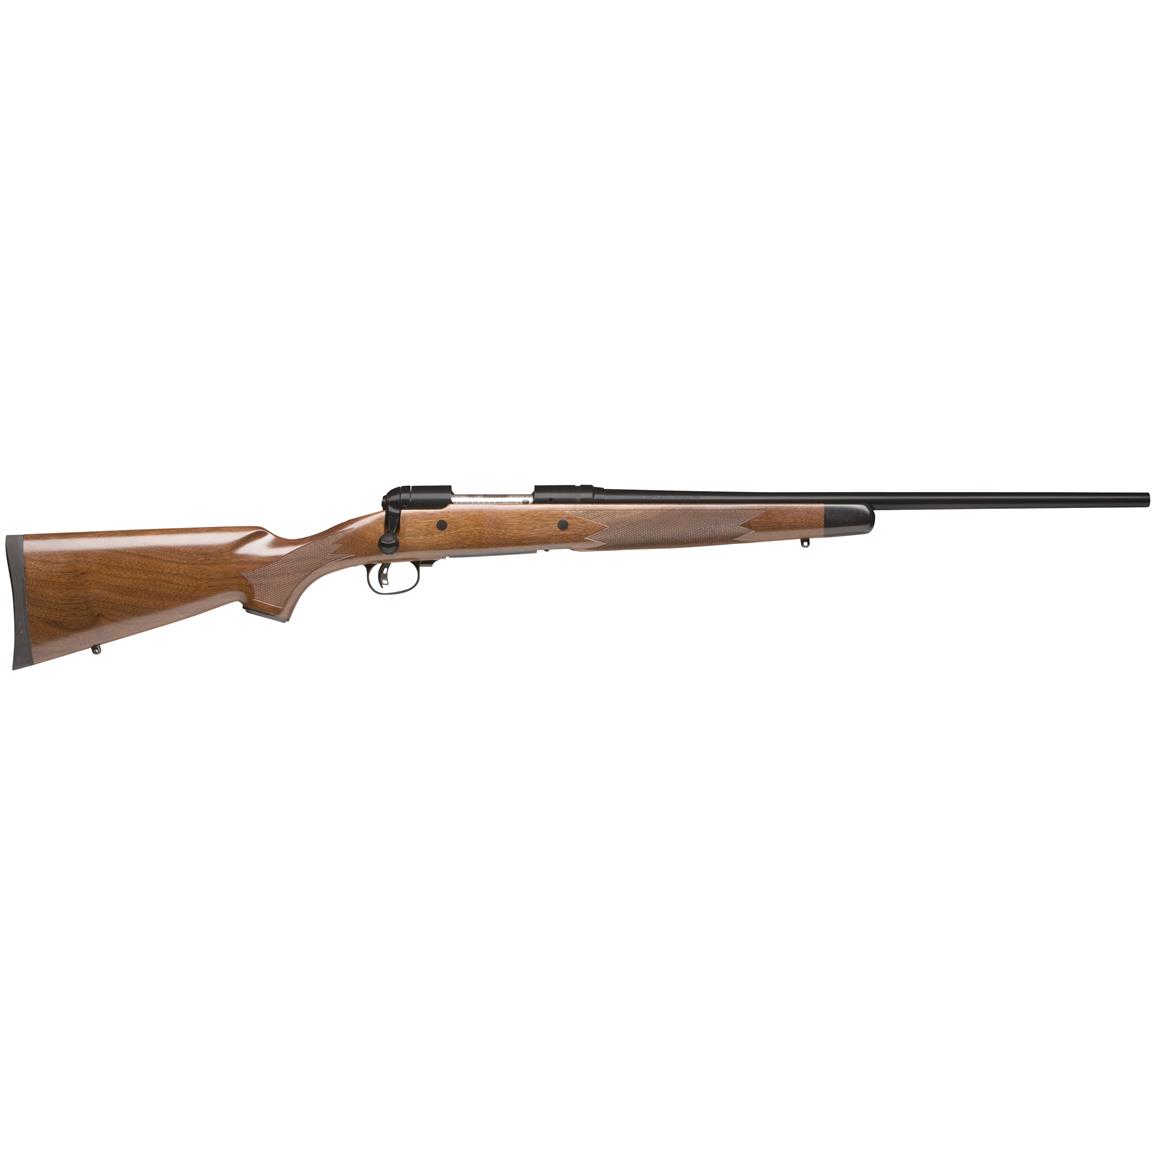 Image result for savage model 14 classic